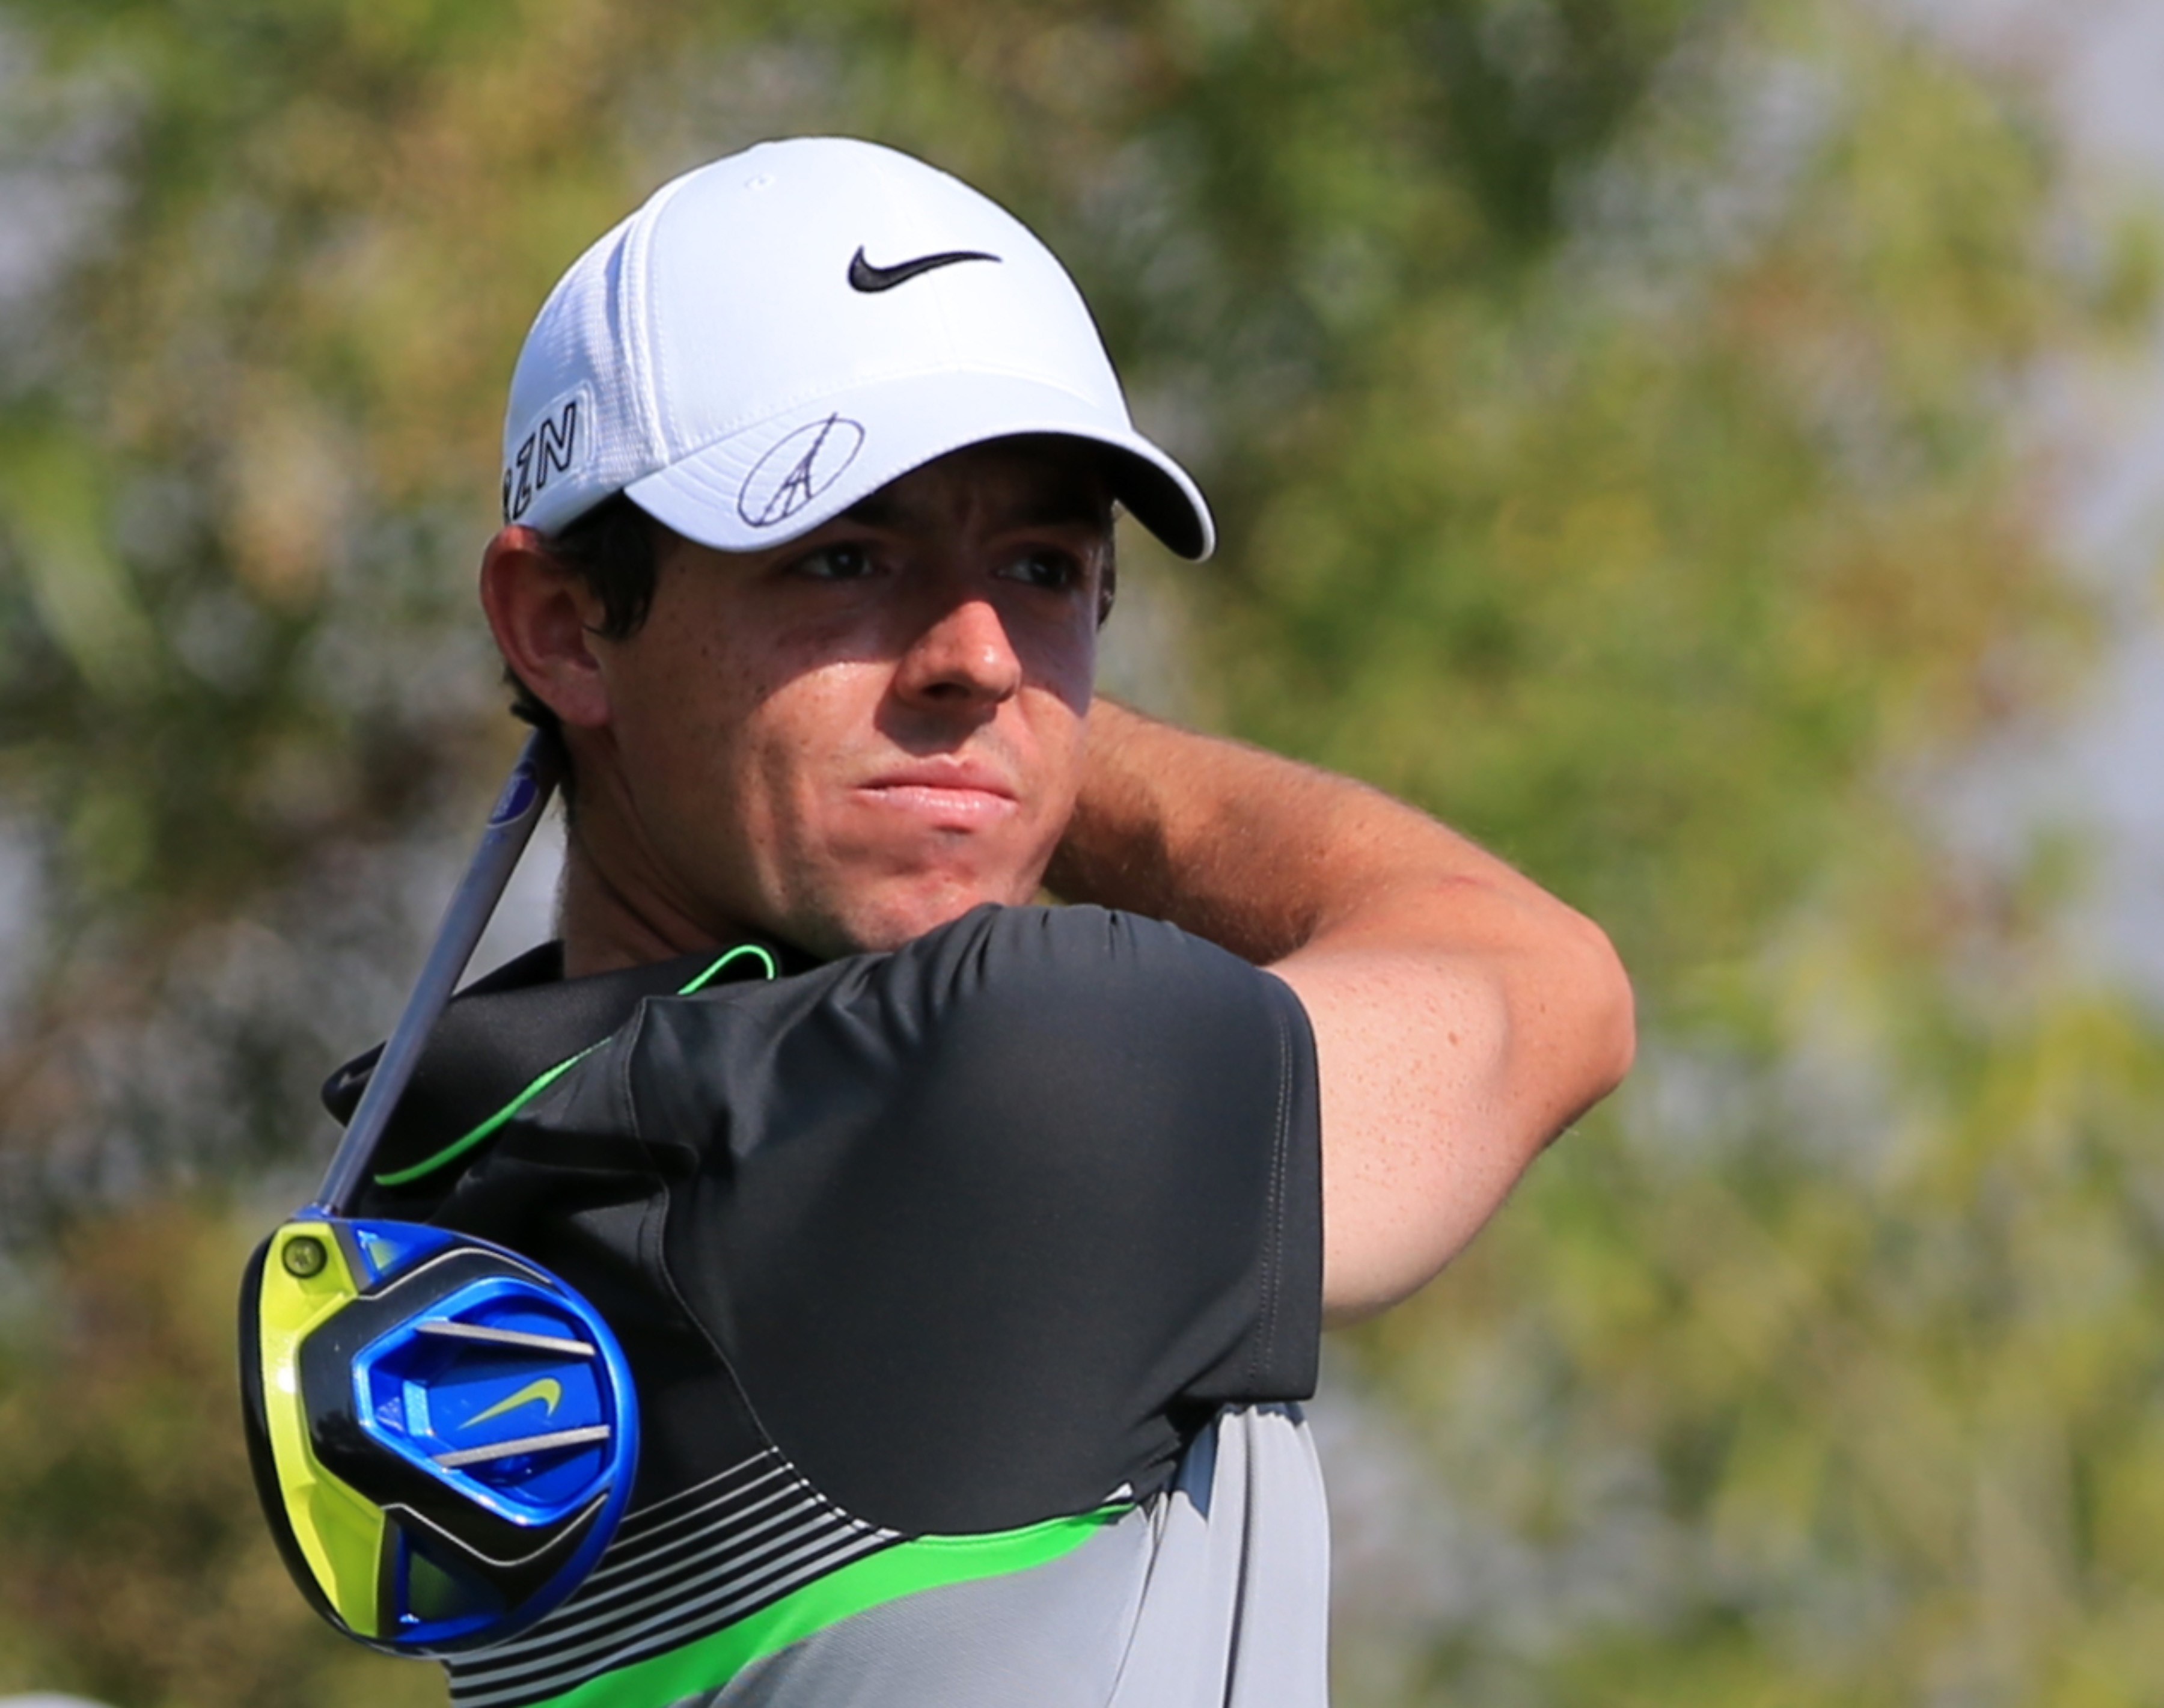 McIlroy is playing a Nike Vapor Prototype driver (Photo: Getty Images)